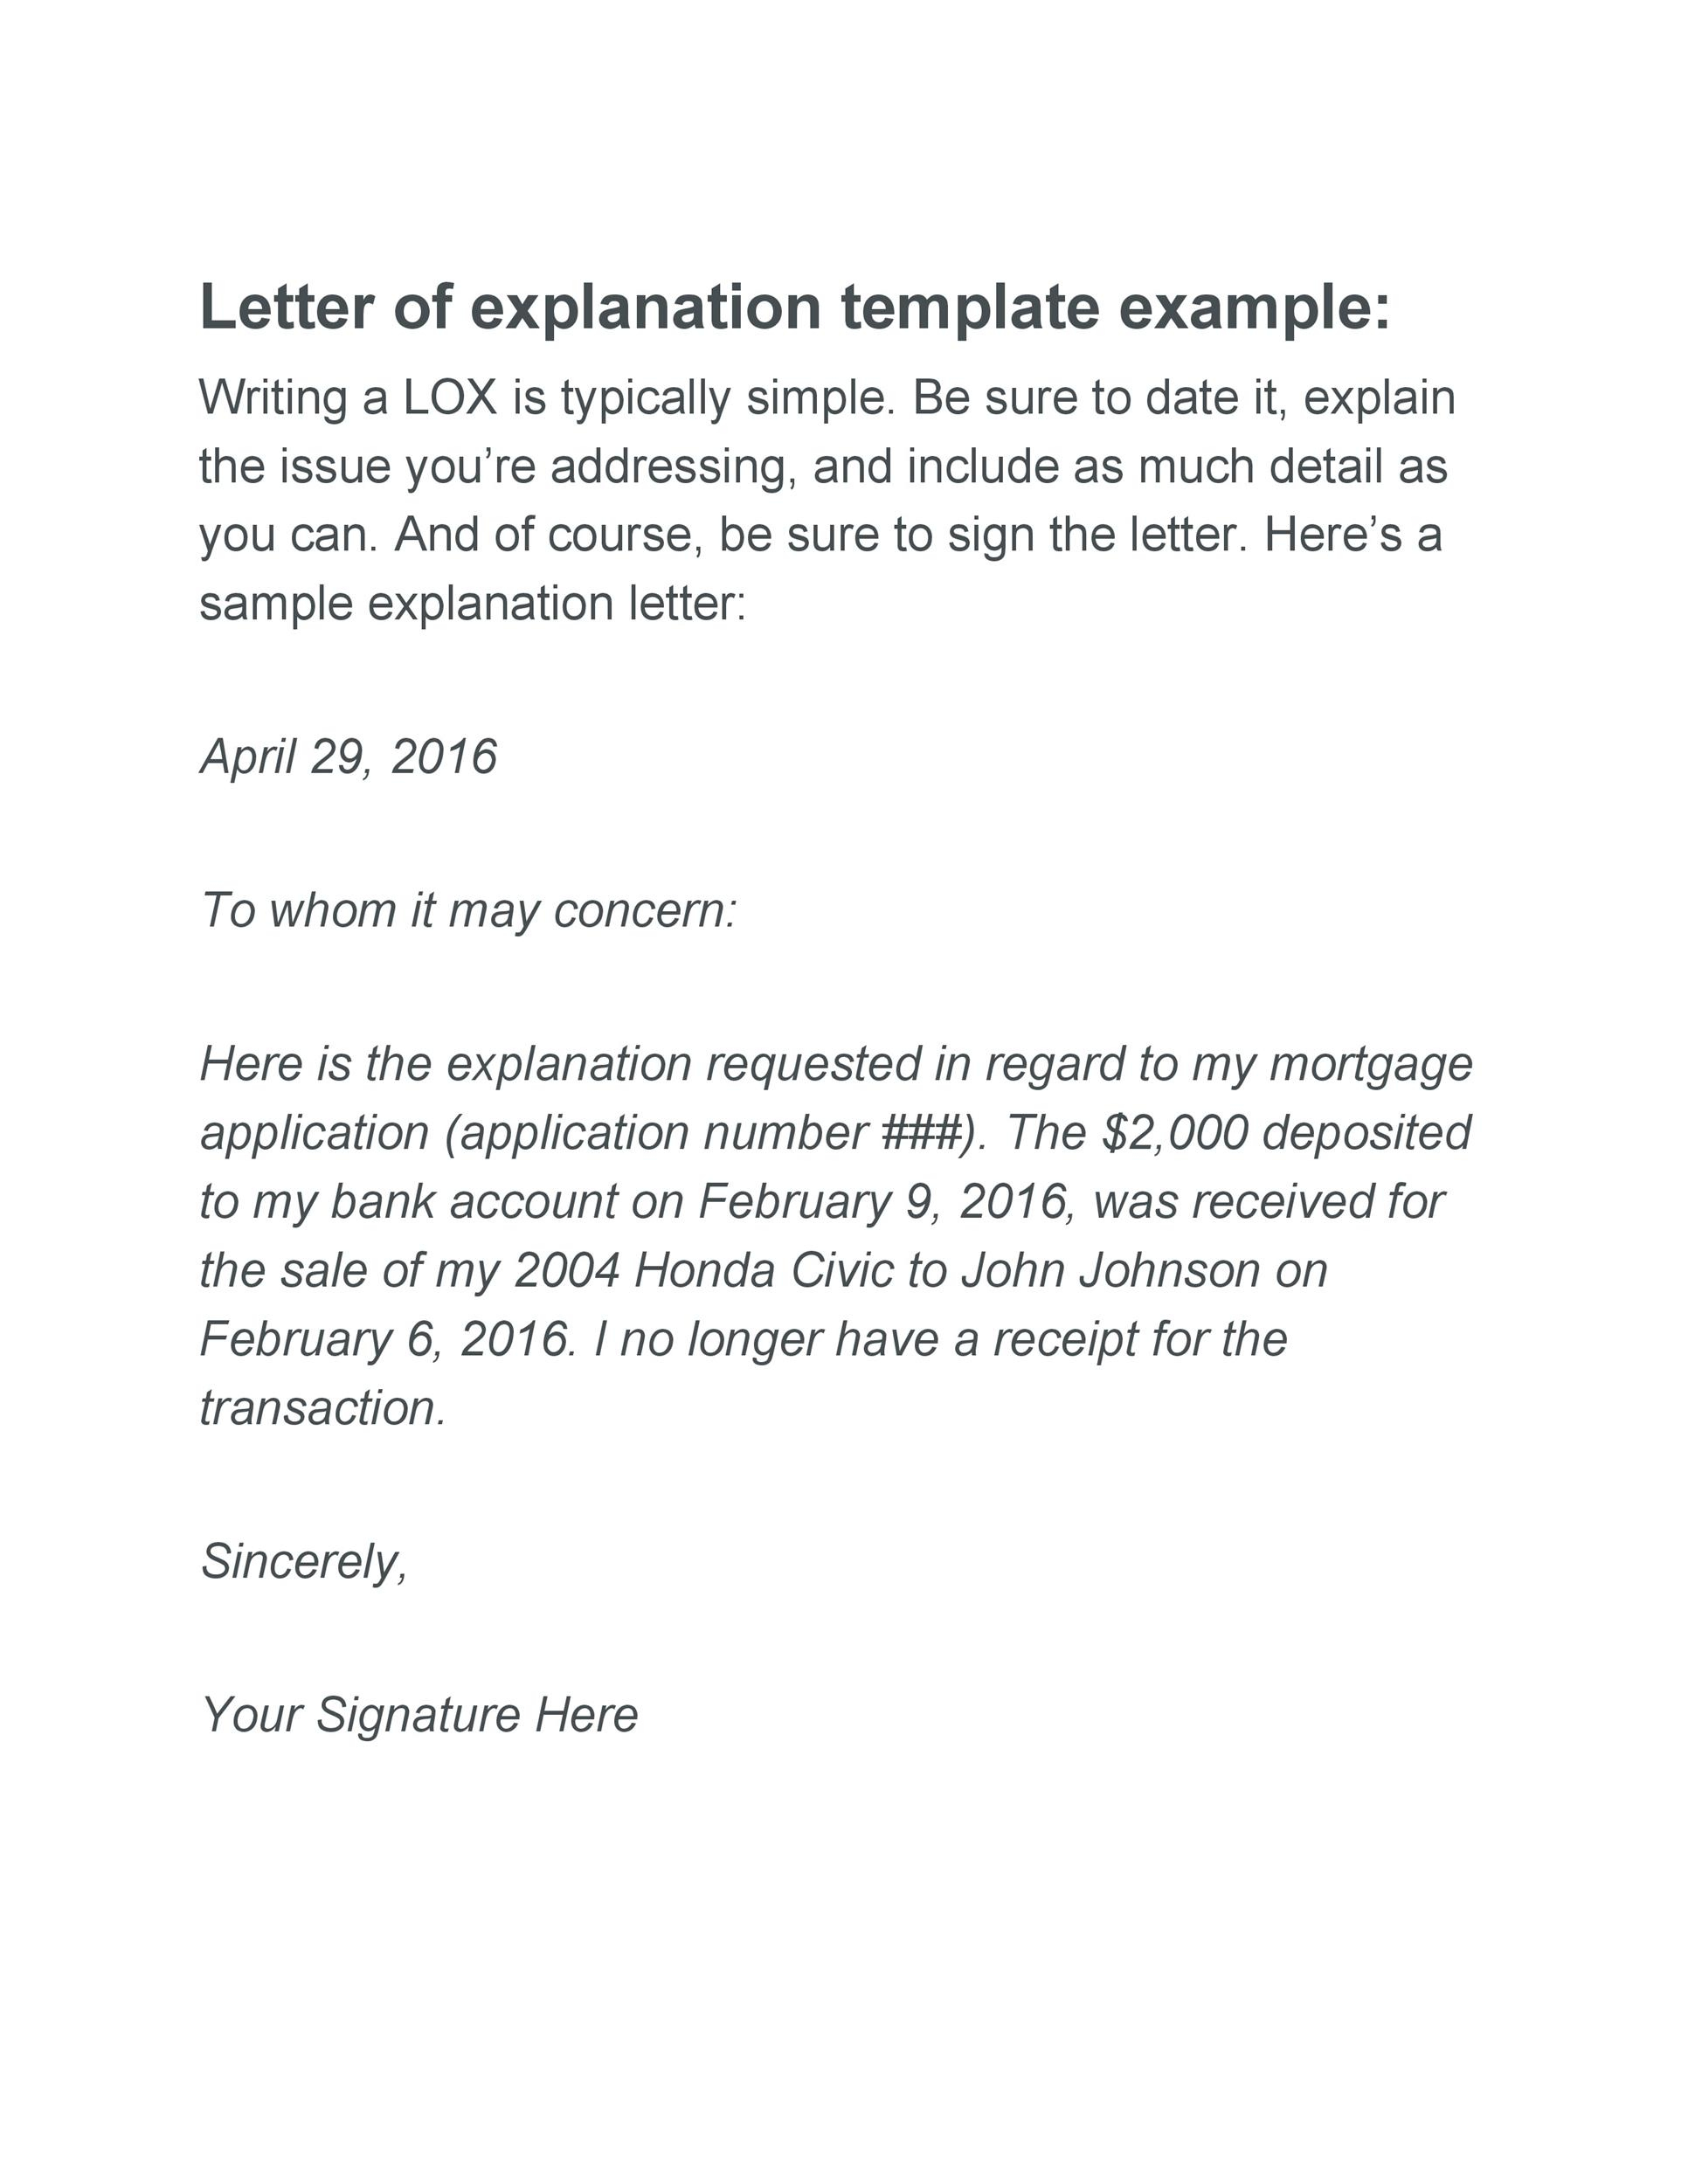 48 Letters Of Explanation Templates (Mortgage, Derogatory pertaining to Letter Of Explanation Template